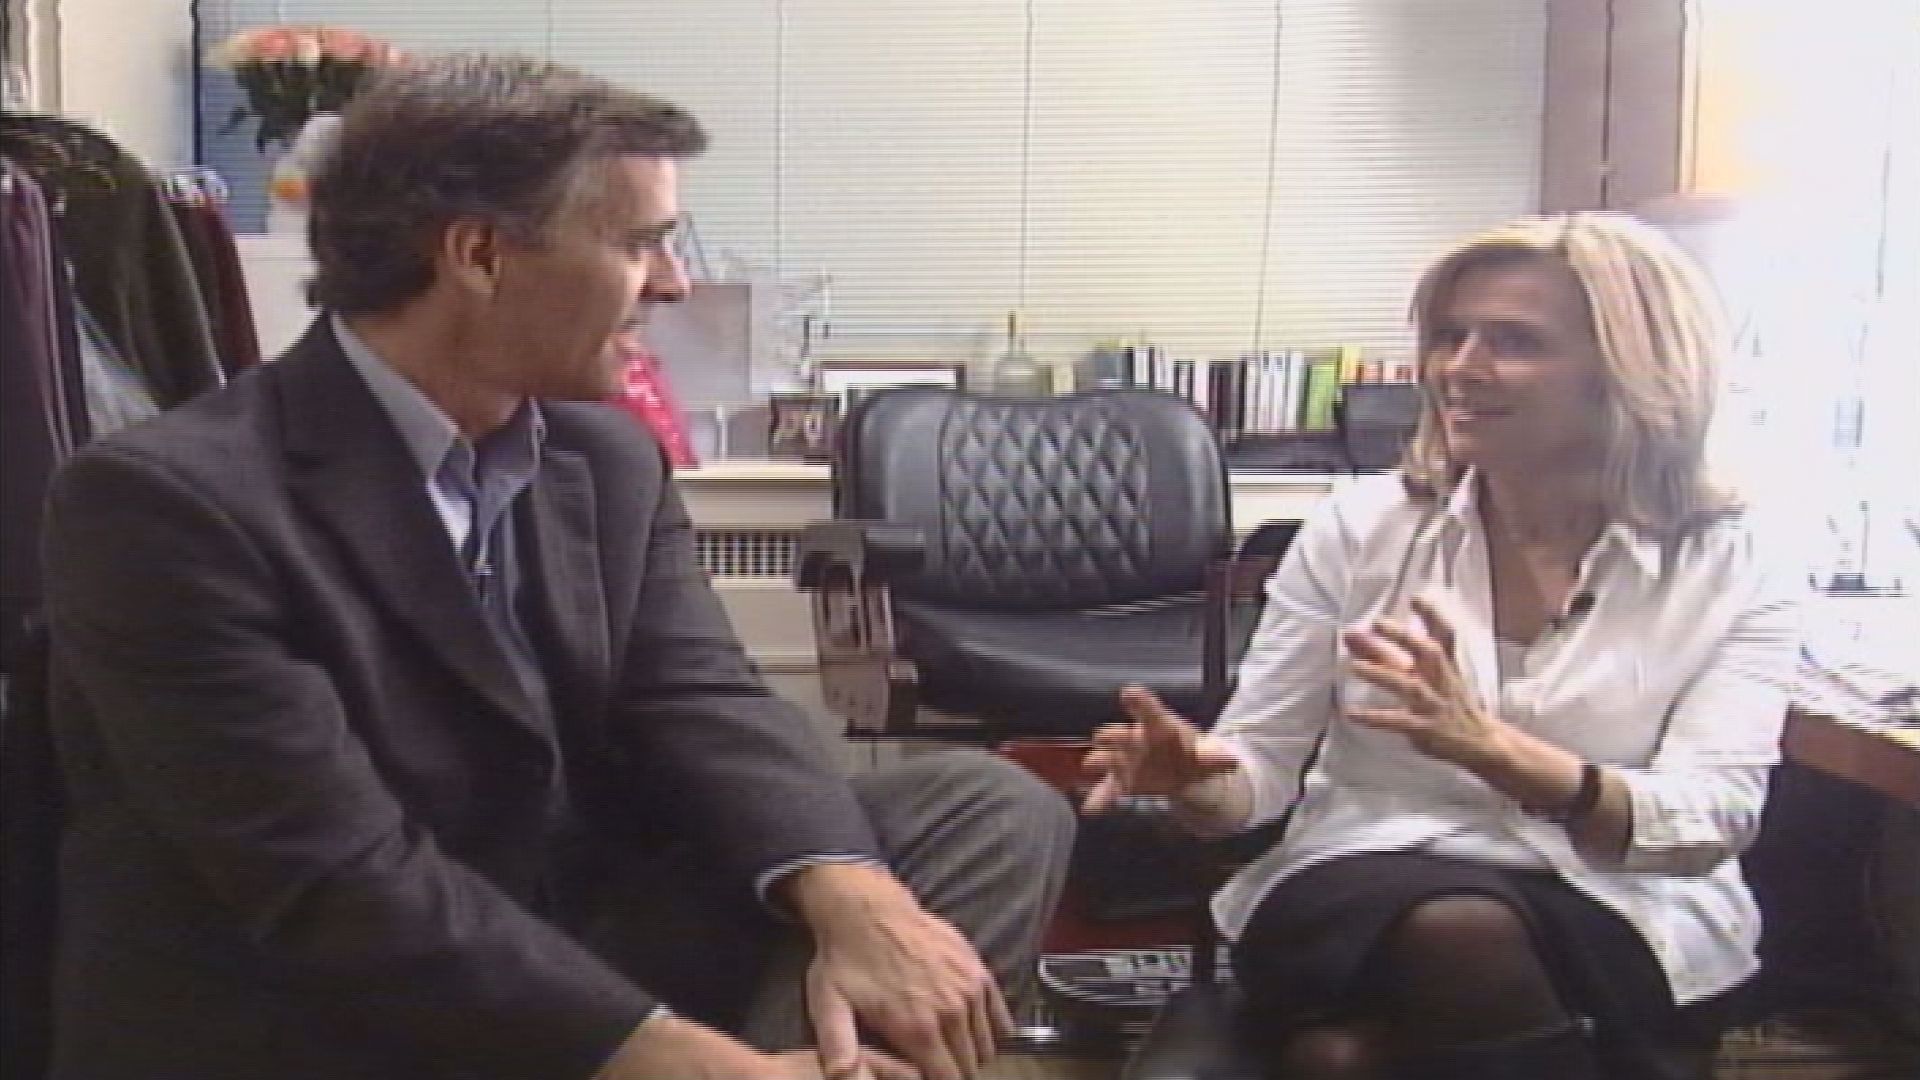 In a 2007 interview with Rob Caldwell, Meredith Vieira admitted that she wasn't always well-rested on the "Today" show after staying up late to watch the Red Sox.